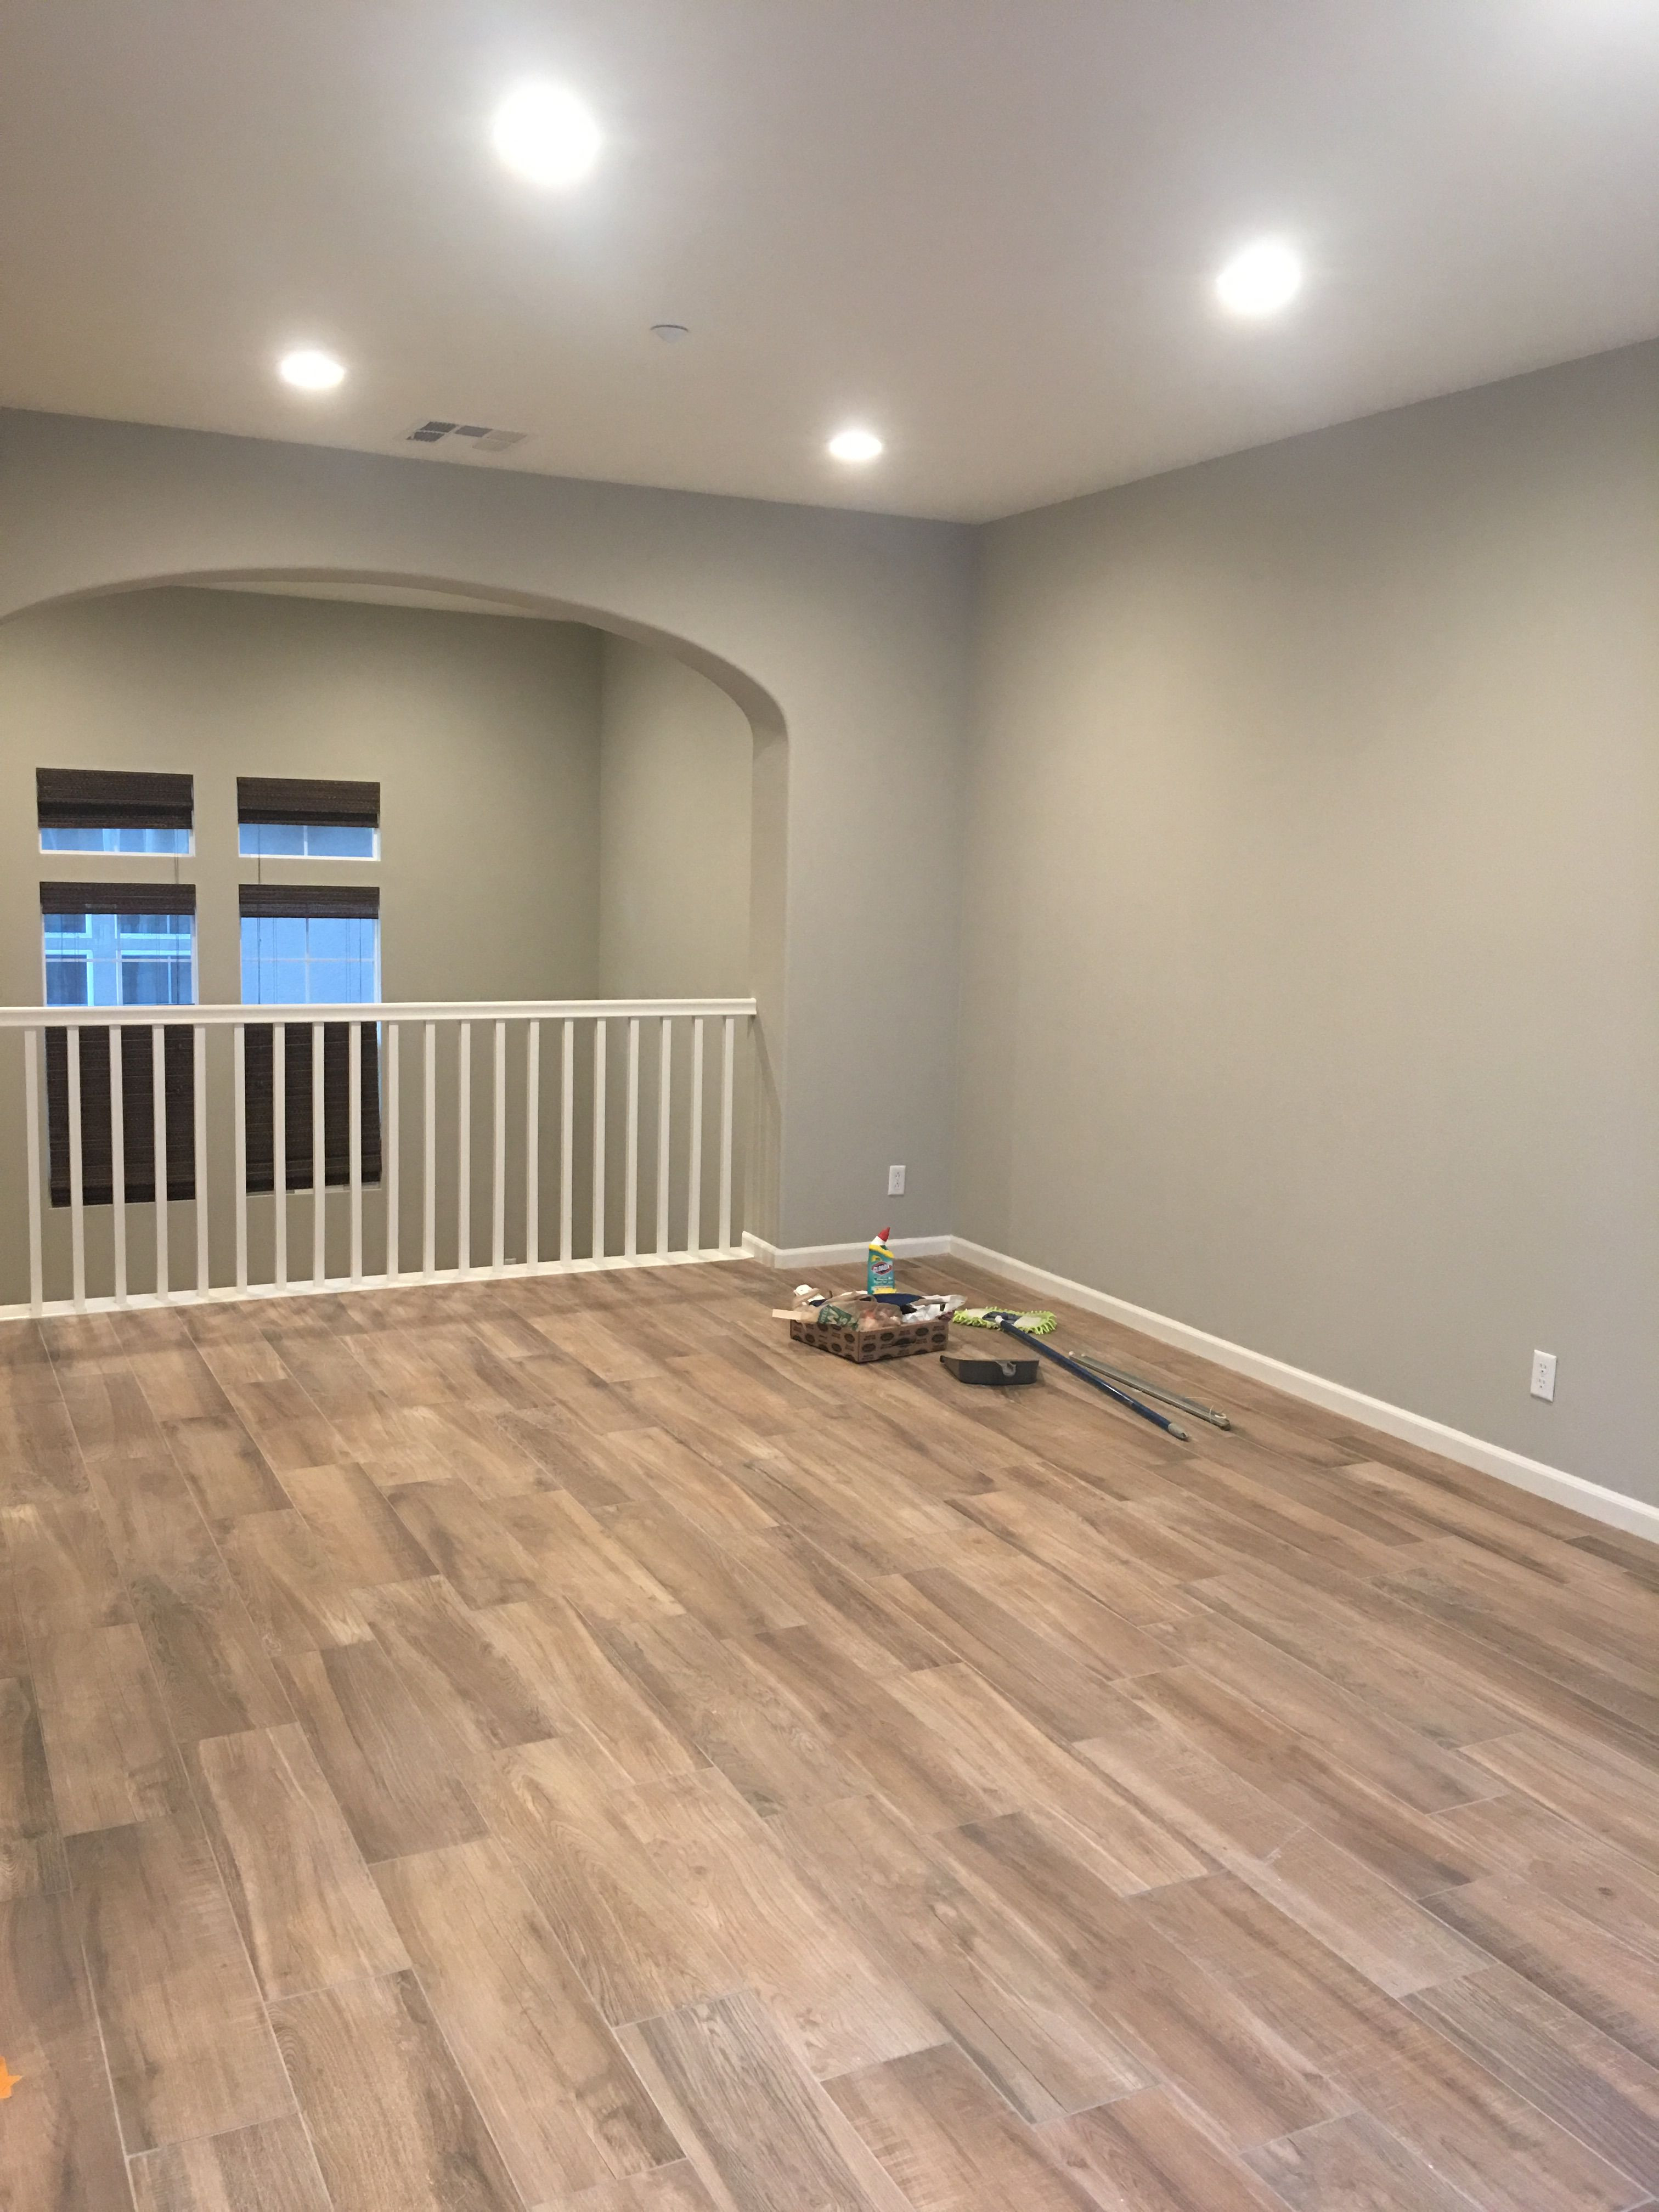 getting paint off hardwood floors of how to get paint off wood floors floor for how to get paint off wood floors benjamin moore wall color revere pewter and wood look